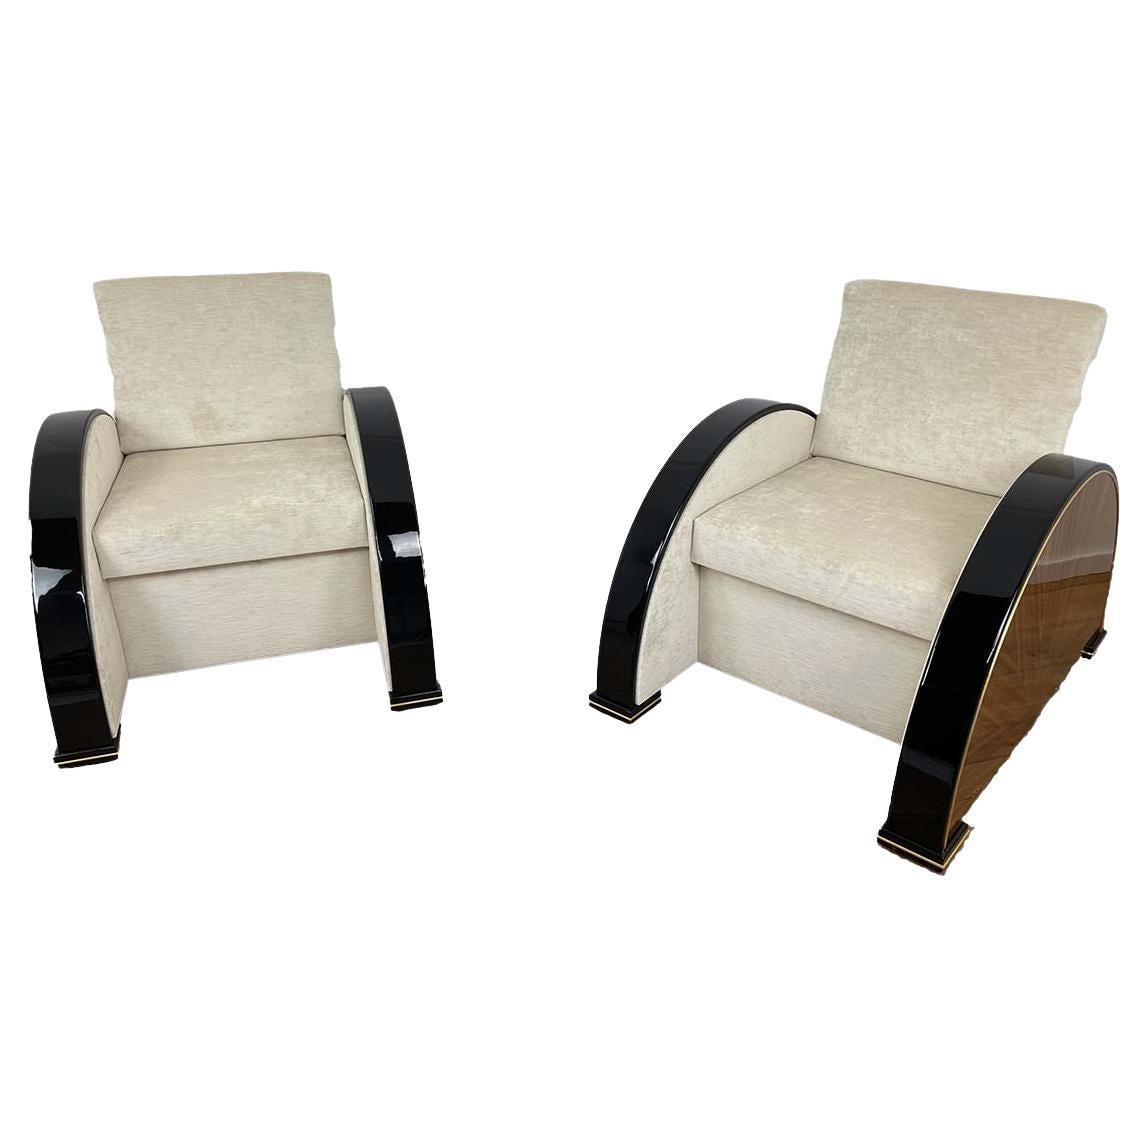 Pair of Art Deco Style Armchairs in Walnut and Piano Black with Brass Details